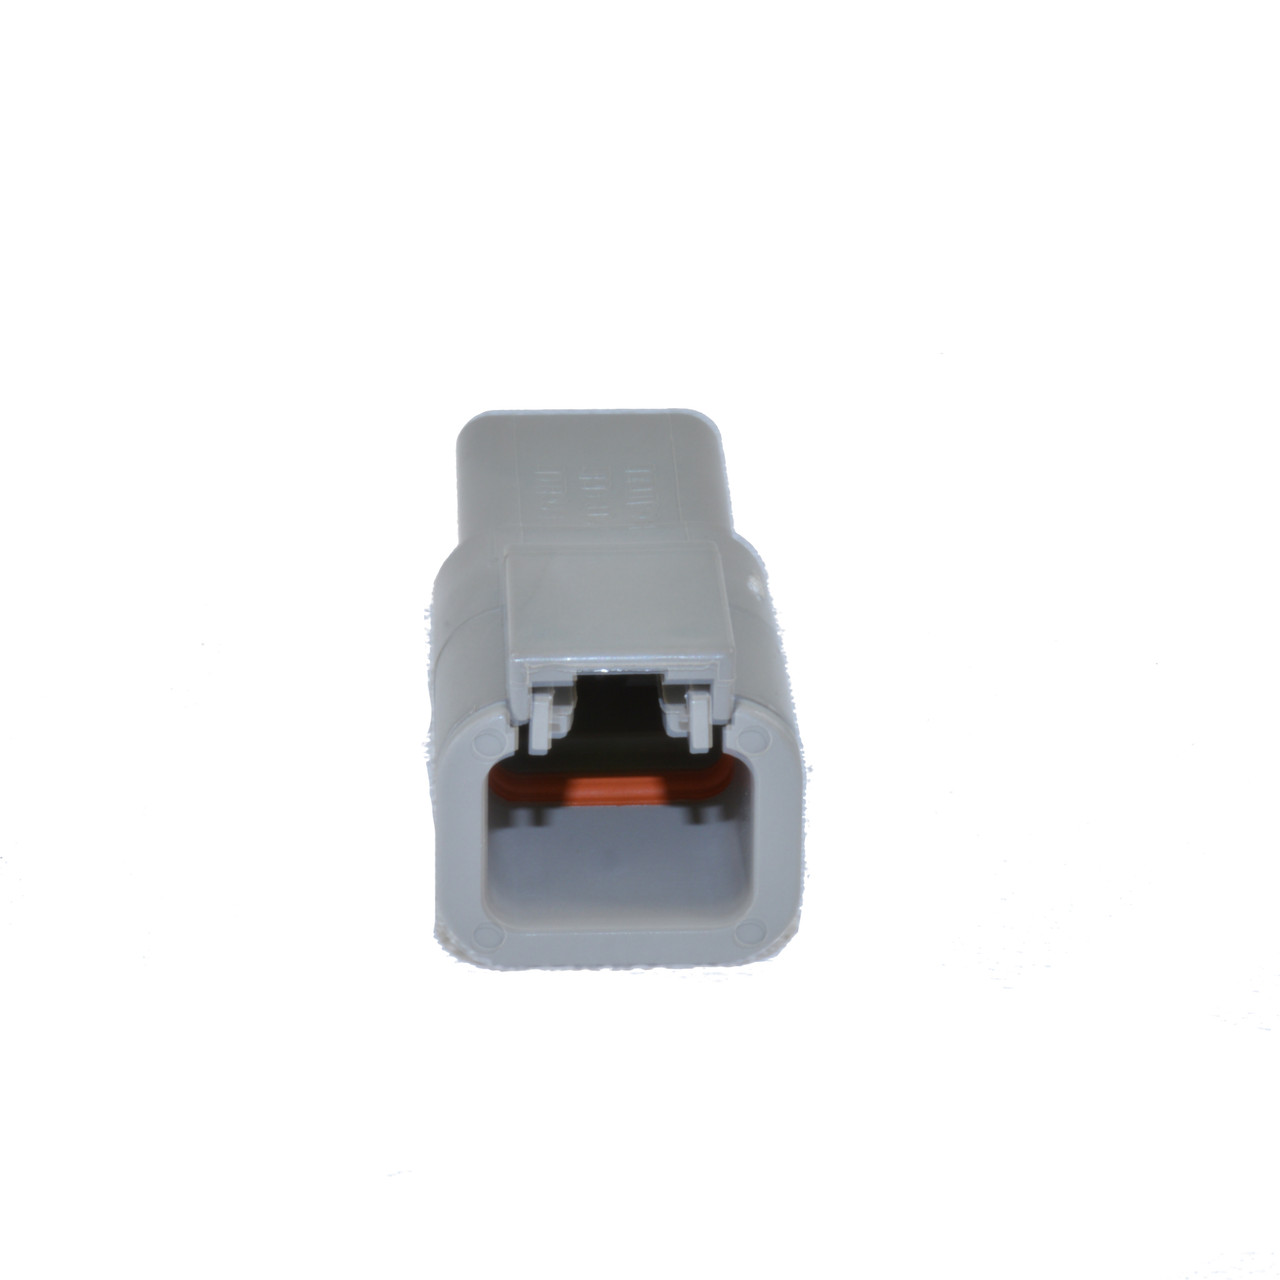 CONNECTOR 2 PIN - 10-12 GA WIRE (for 2006 - on blowers & other applications)